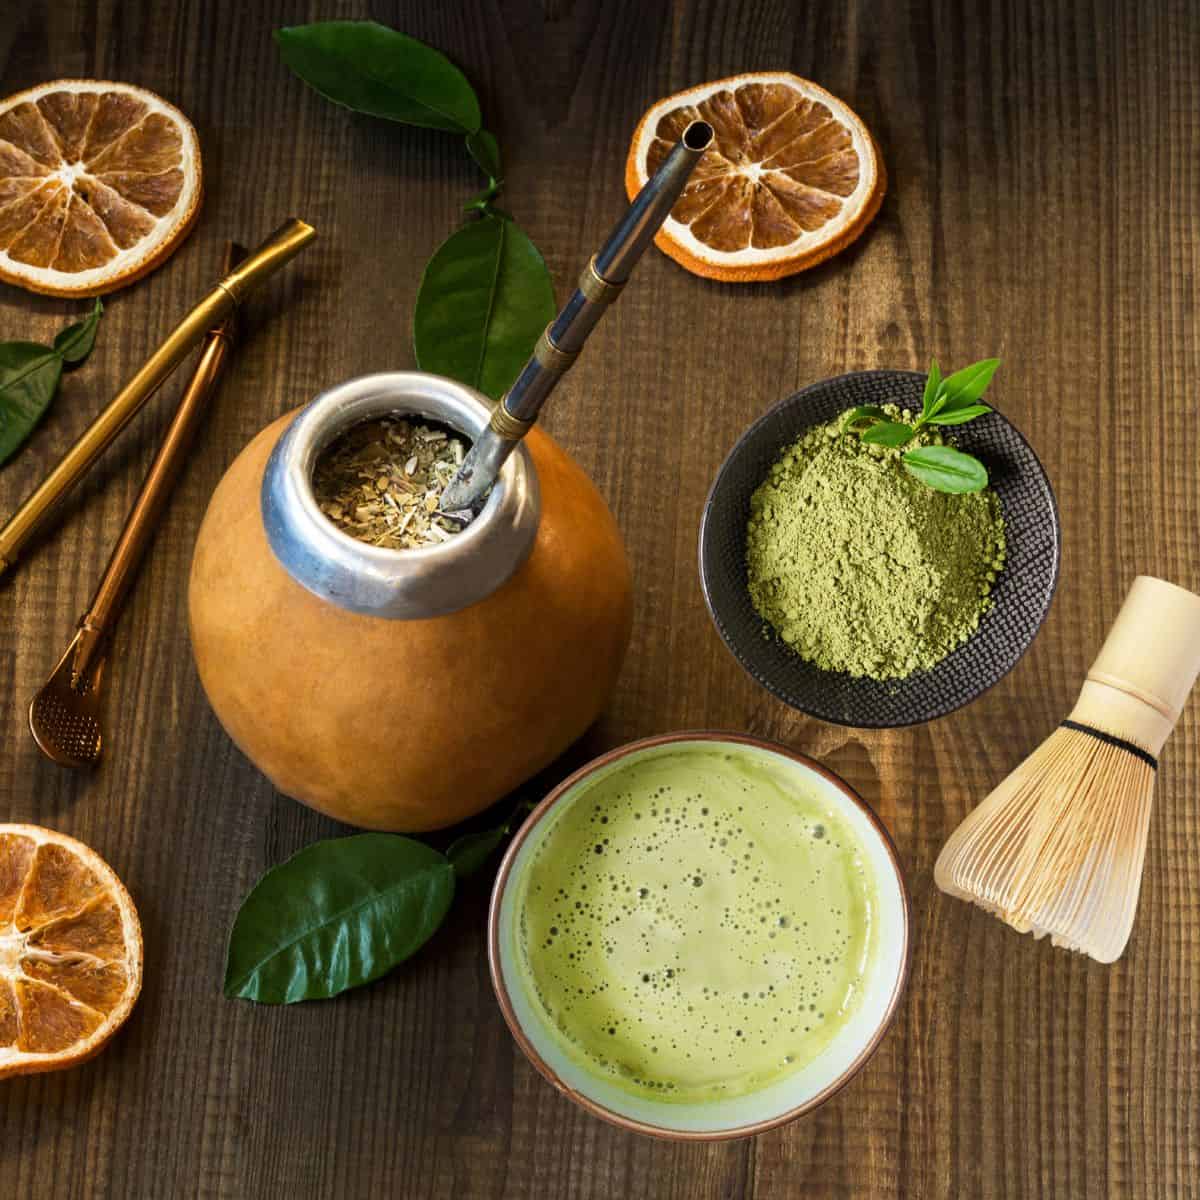 A wooden table with a burnt orange yerba mate gourd mug with silver lip and straw with herbs inside surrounded by dried orange slices and green leaves with special sifting tools laid next to it. on the right is a small brown-rimmed white cup of frothy matcha next to a bamboo whisk and black speckled bowl of vibrant green matcha powder